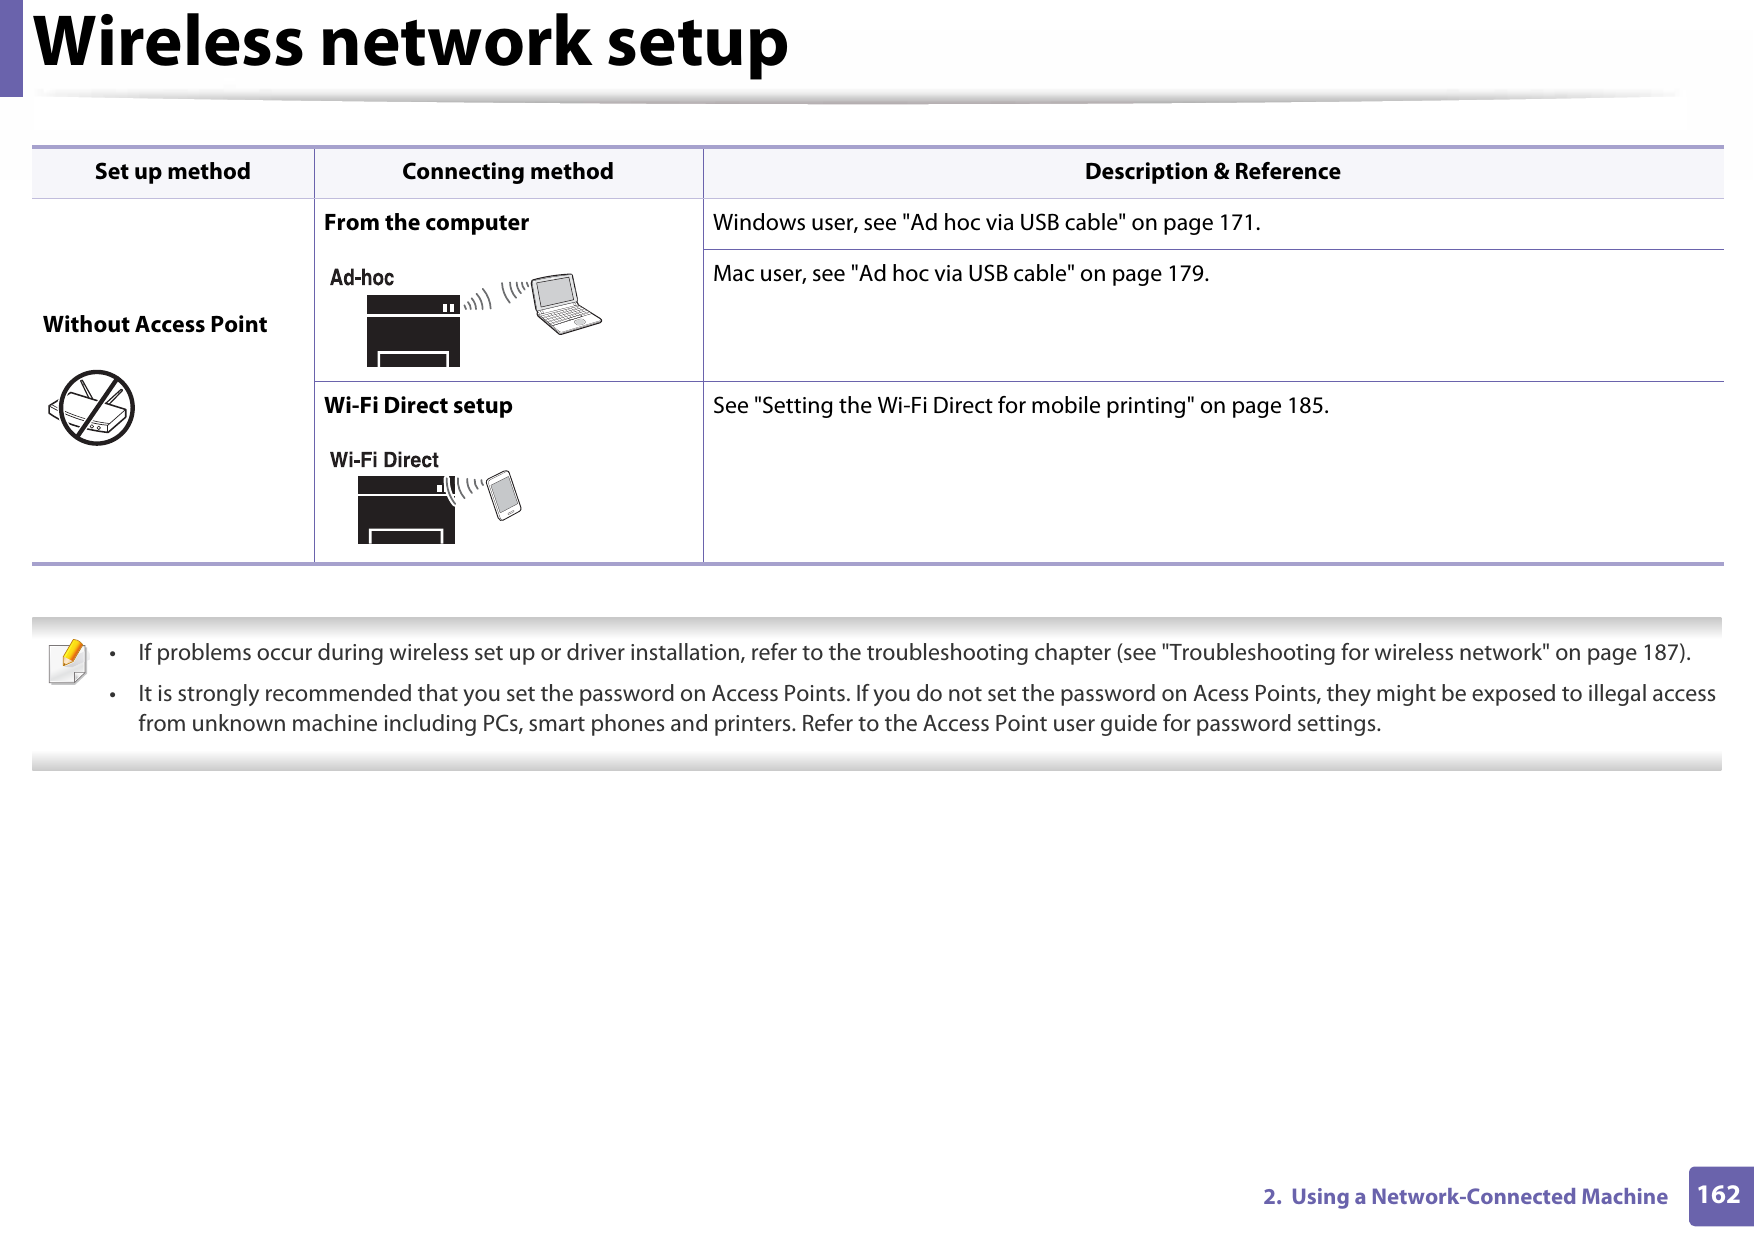 Wireless network setup1622.  Using a Network-Connected Machine  • If problems occur during wireless set up or driver installation, refer to the troubleshooting chapter (see &quot;Troubleshooting for wireless network&quot; on page 187).• It is strongly recommended that you set the password on Access Points. If you do not set the password on Acess Points, they might be exposed to illegal access from unknown machine including PCs, smart phones and printers. Refer to the Access Point user guide for password settings. Without Access PointFrom the computer Windows user, see &quot;Ad hoc via USB cable&quot; on page 171.Mac user, see &quot;Ad hoc via USB cable&quot; on page 179.Wi-Fi Direct setup See &quot;Setting the Wi-Fi Direct for mobile printing&quot; on page 185.Set up method Connecting method Description &amp; Reference